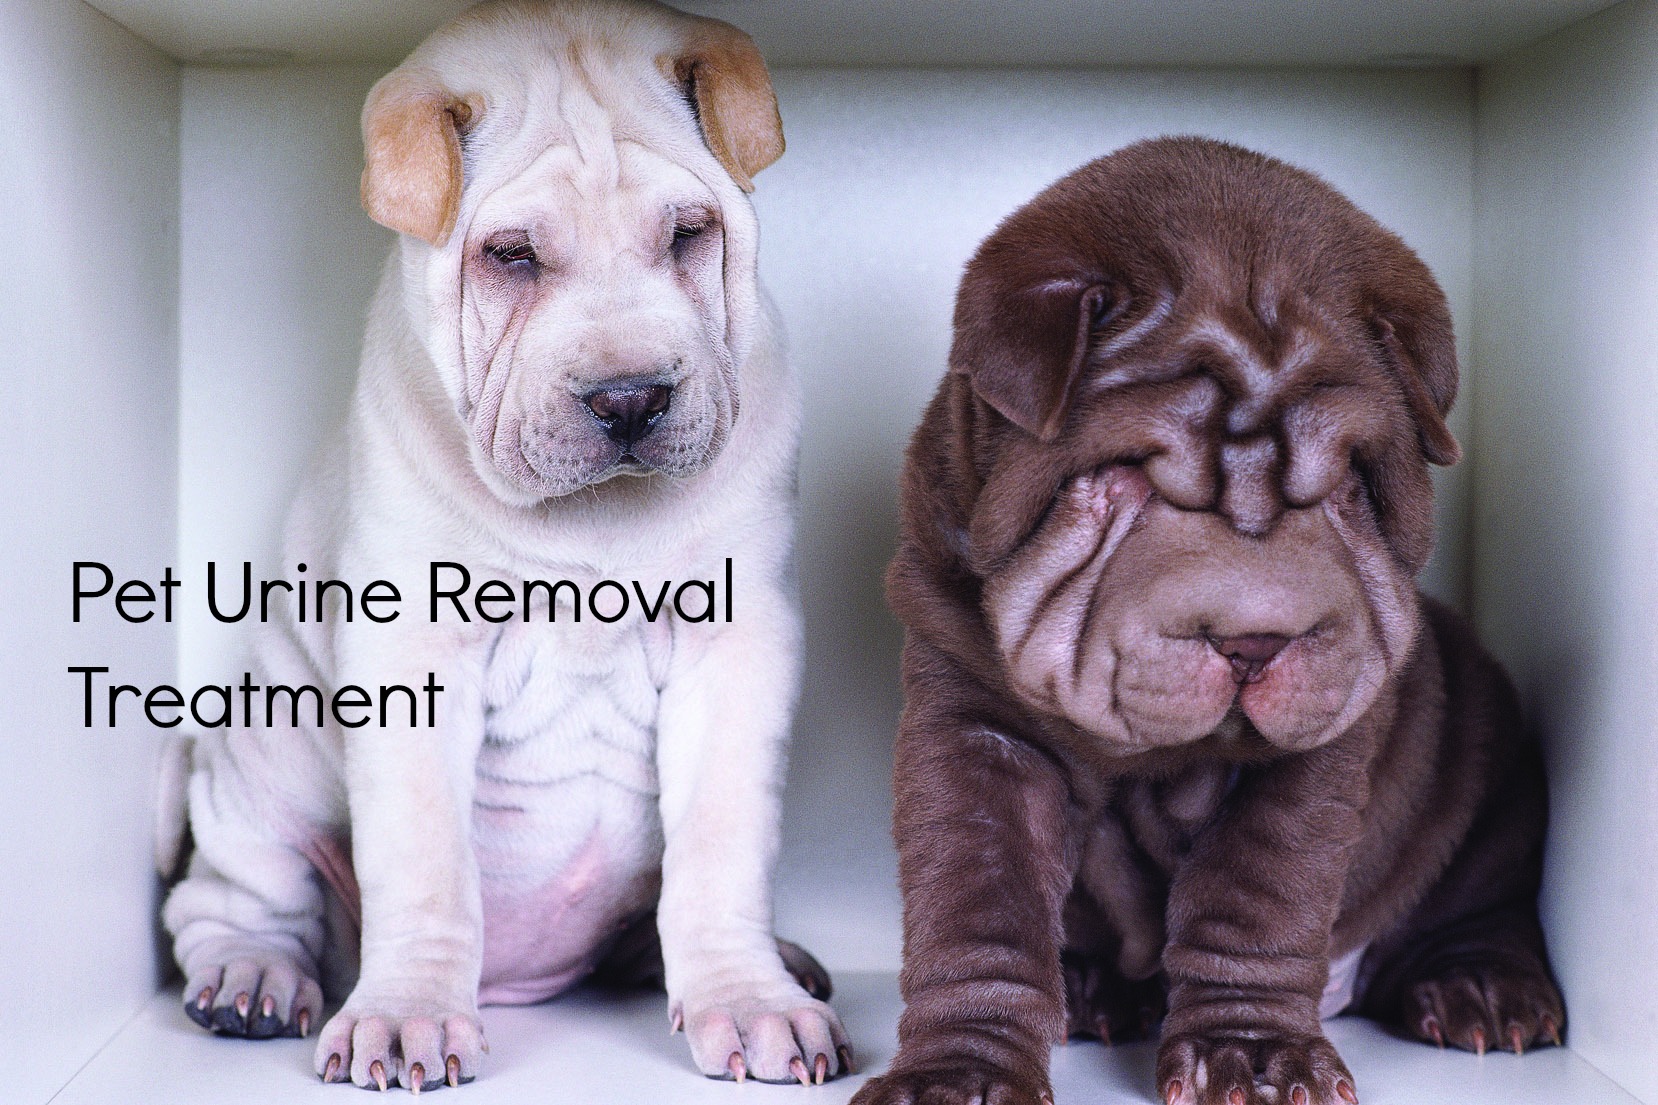 We offer Pet Urine Removal Treatment to take care of those smelly spots and stains! Zachary's Chem-Dry Jacksonville (904)620-7310